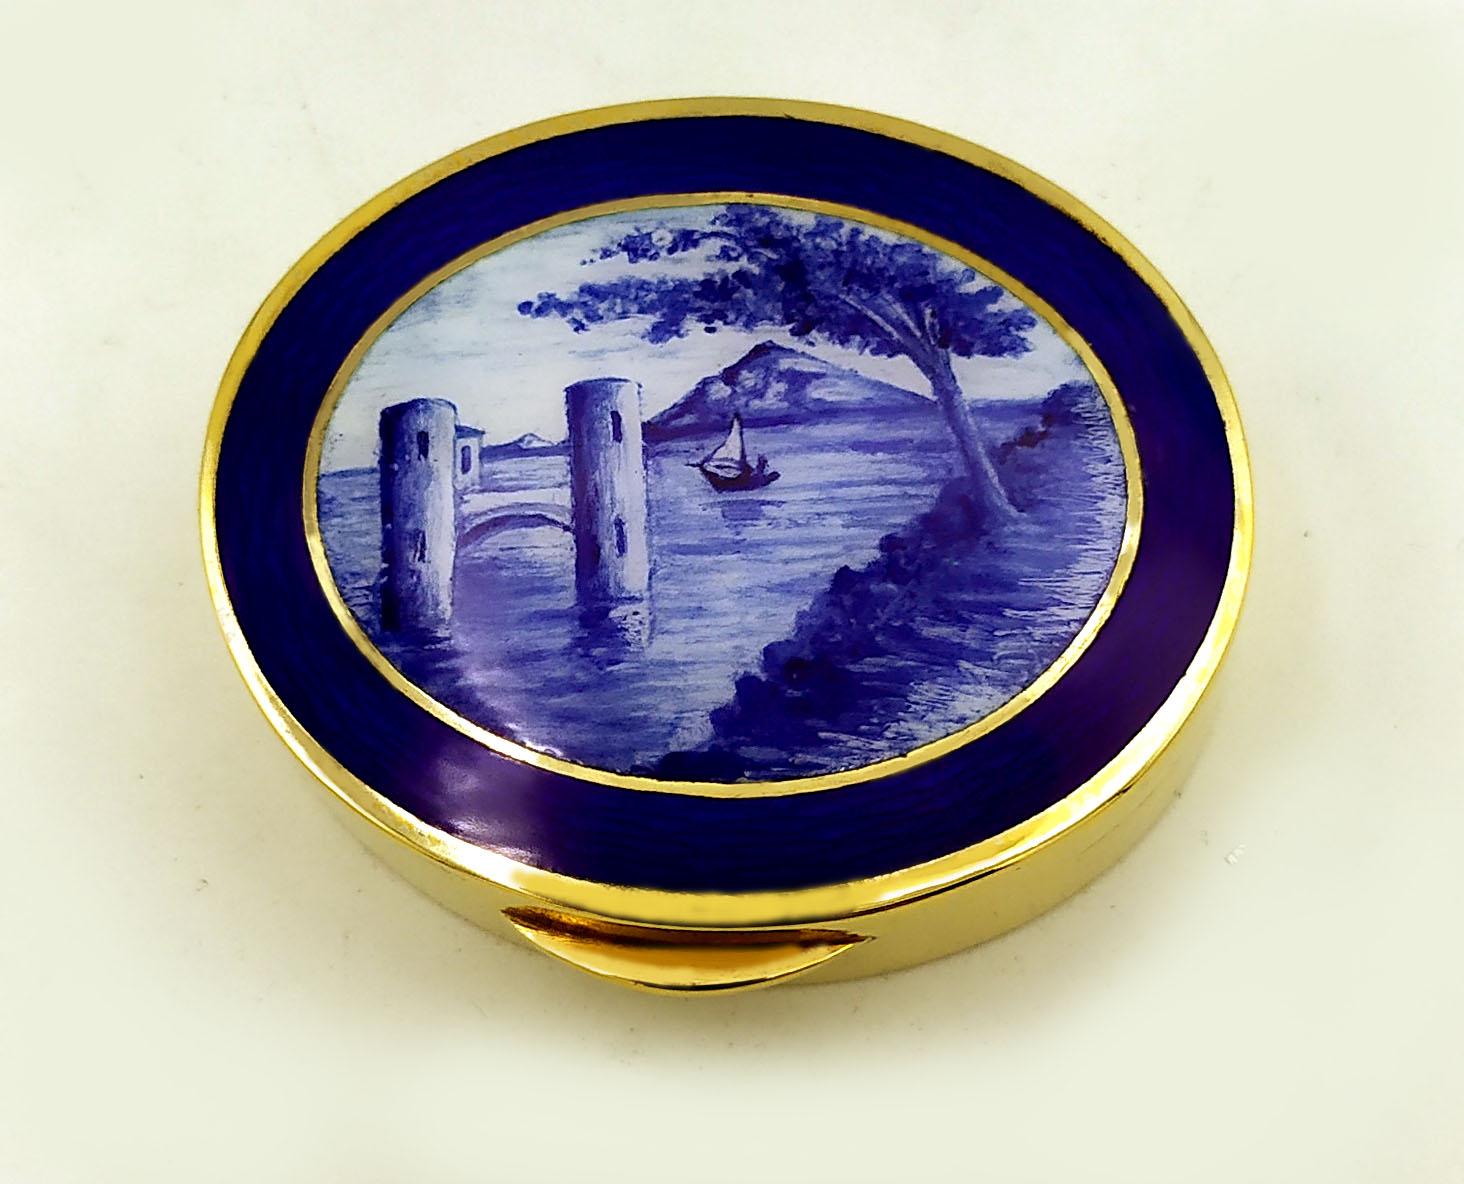 Oval pillbox in 925/1000 sterling silver gold plated with hand painted fine monochrome fire enamelled miniature depicting a landscape in Art Nouveau style. Dimensions cm. 4.5 x 5.5 x 1.4. Weight gr. 70. Designed by Giorgio Salimbeni in 1977 and